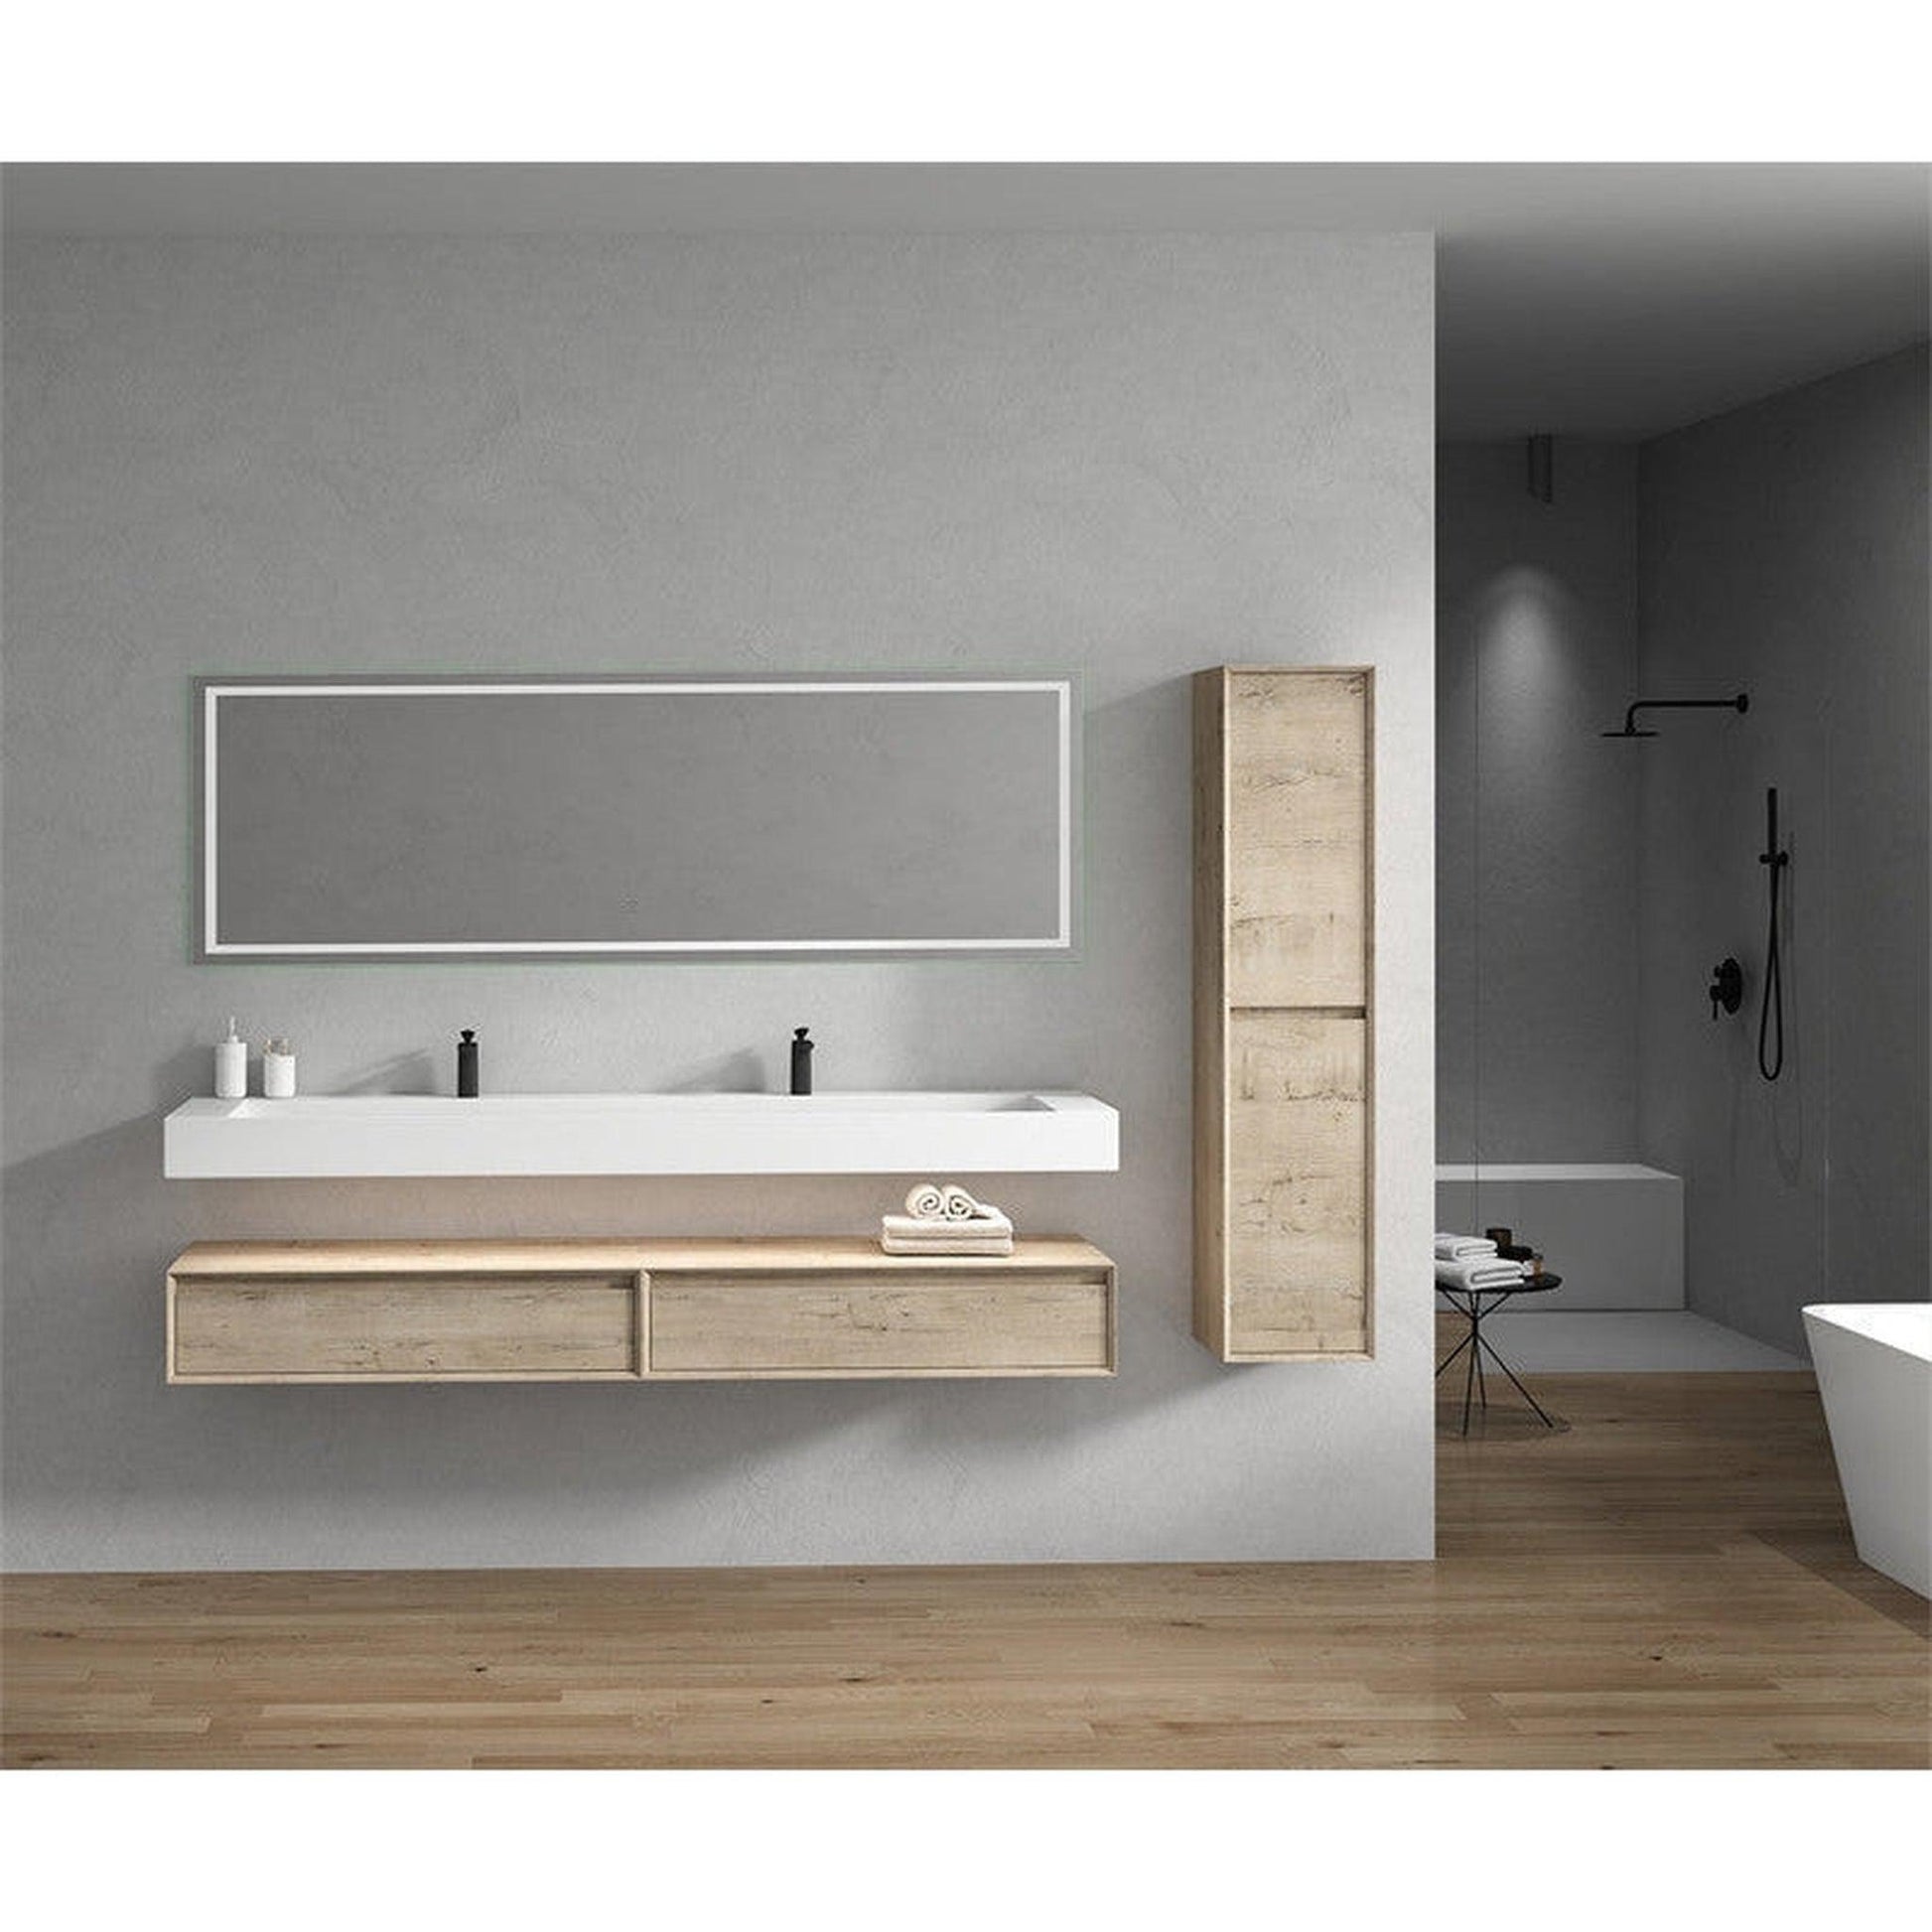 Moreno Bath ALYSA 84" Light Oak Floating Vanity With Double Faucet Holes and Reinforced White Acrylic Sink